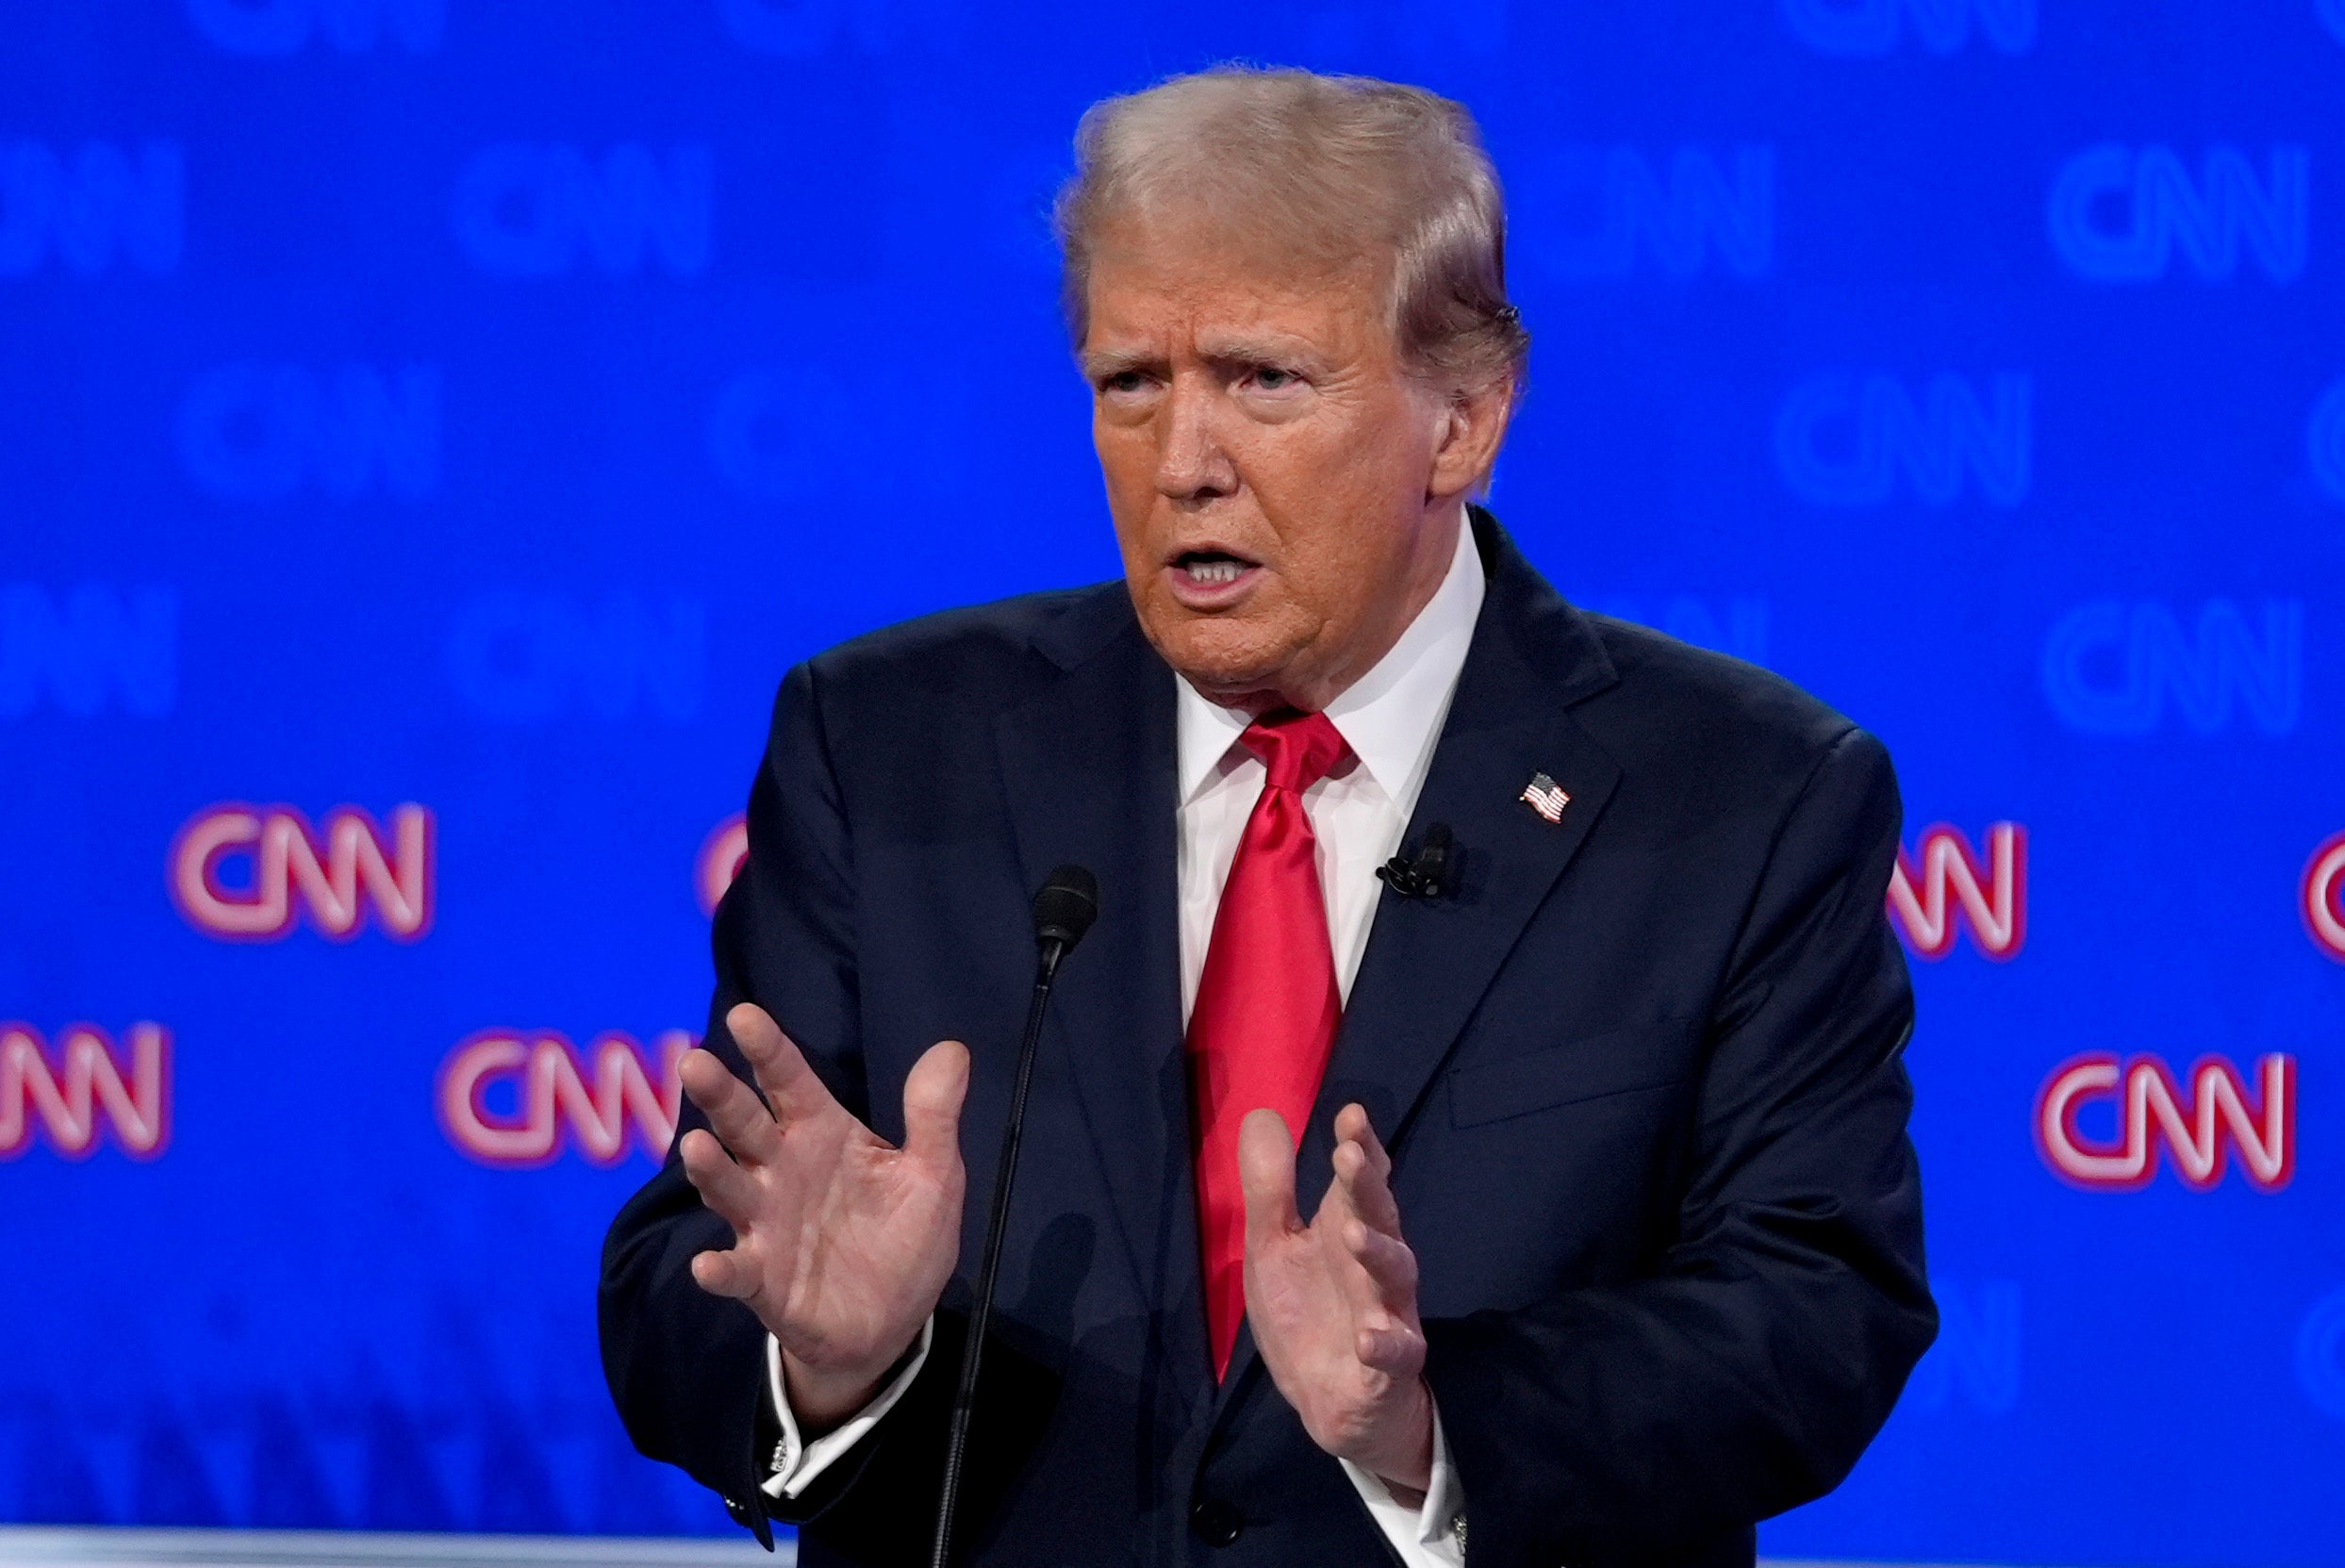 Donald Trump refuses to condemn the January 6 attack during a debate with Joe Biden on June 27